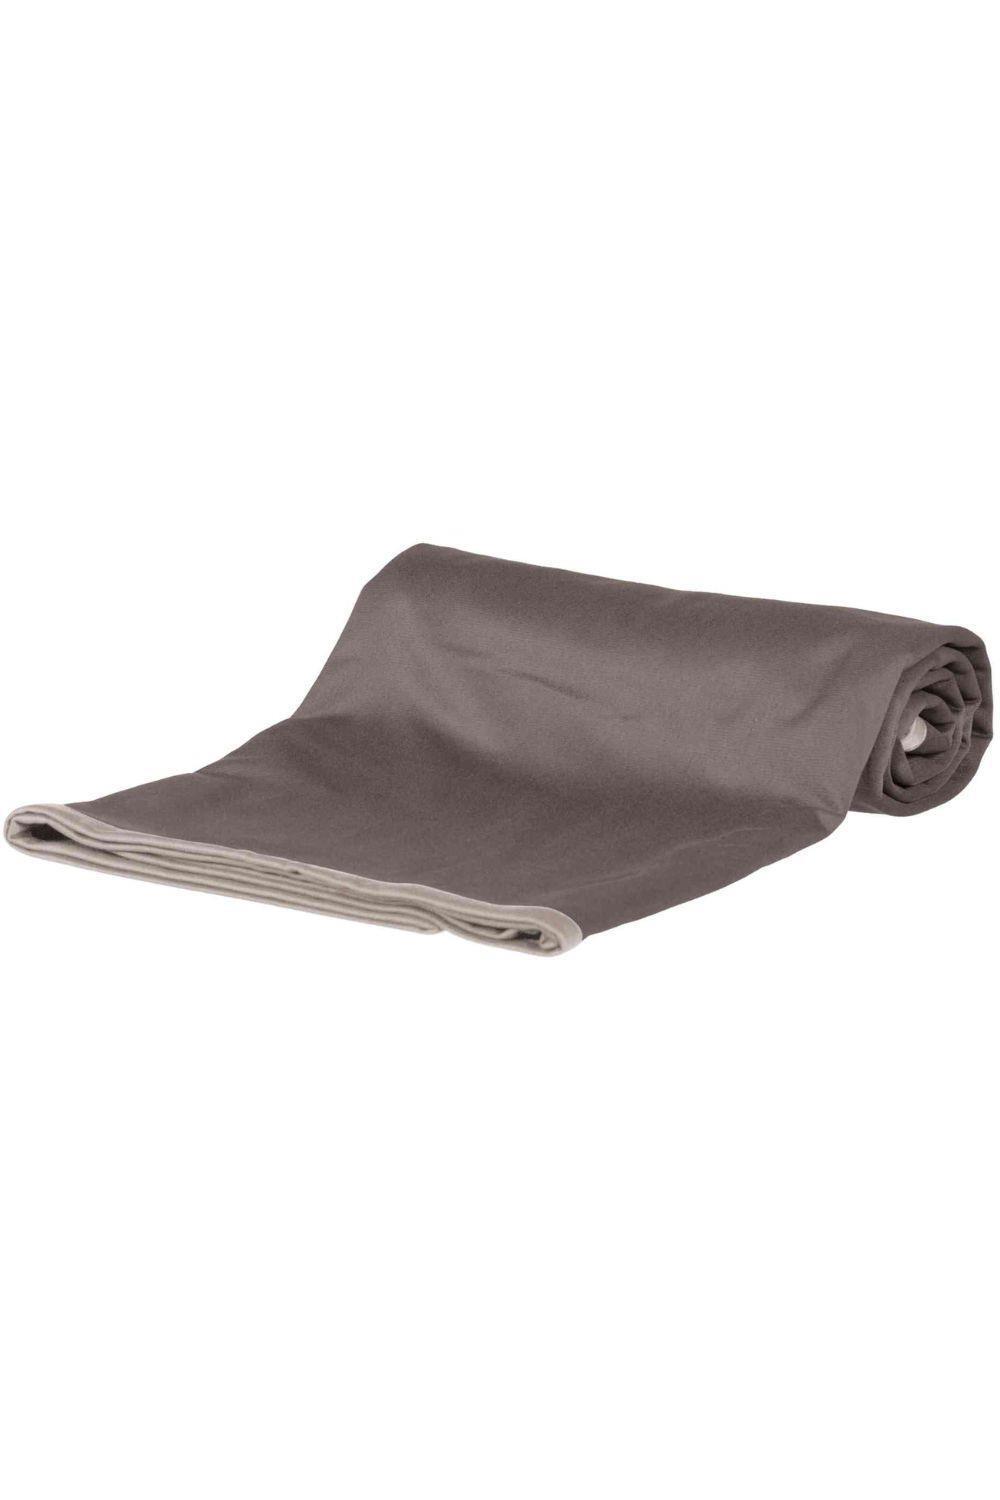 TRIXIE Trixie Insect Shield Outdoor Dog Blanket